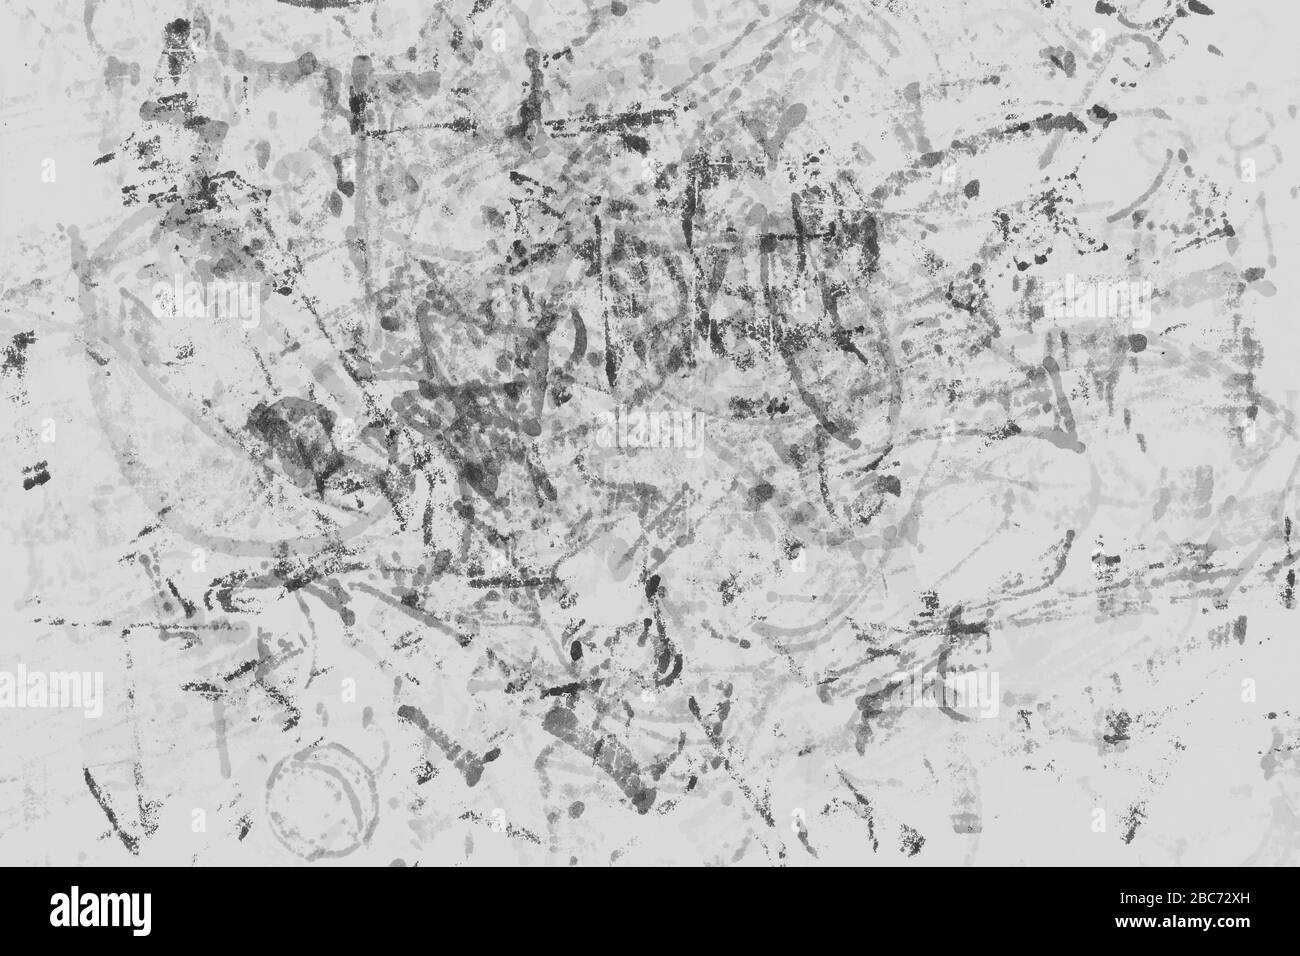 A Highly Textured Grunge Background, Ideal For Photoshop Layer, Mask, And Channel Effects Stock Photo - Alamy